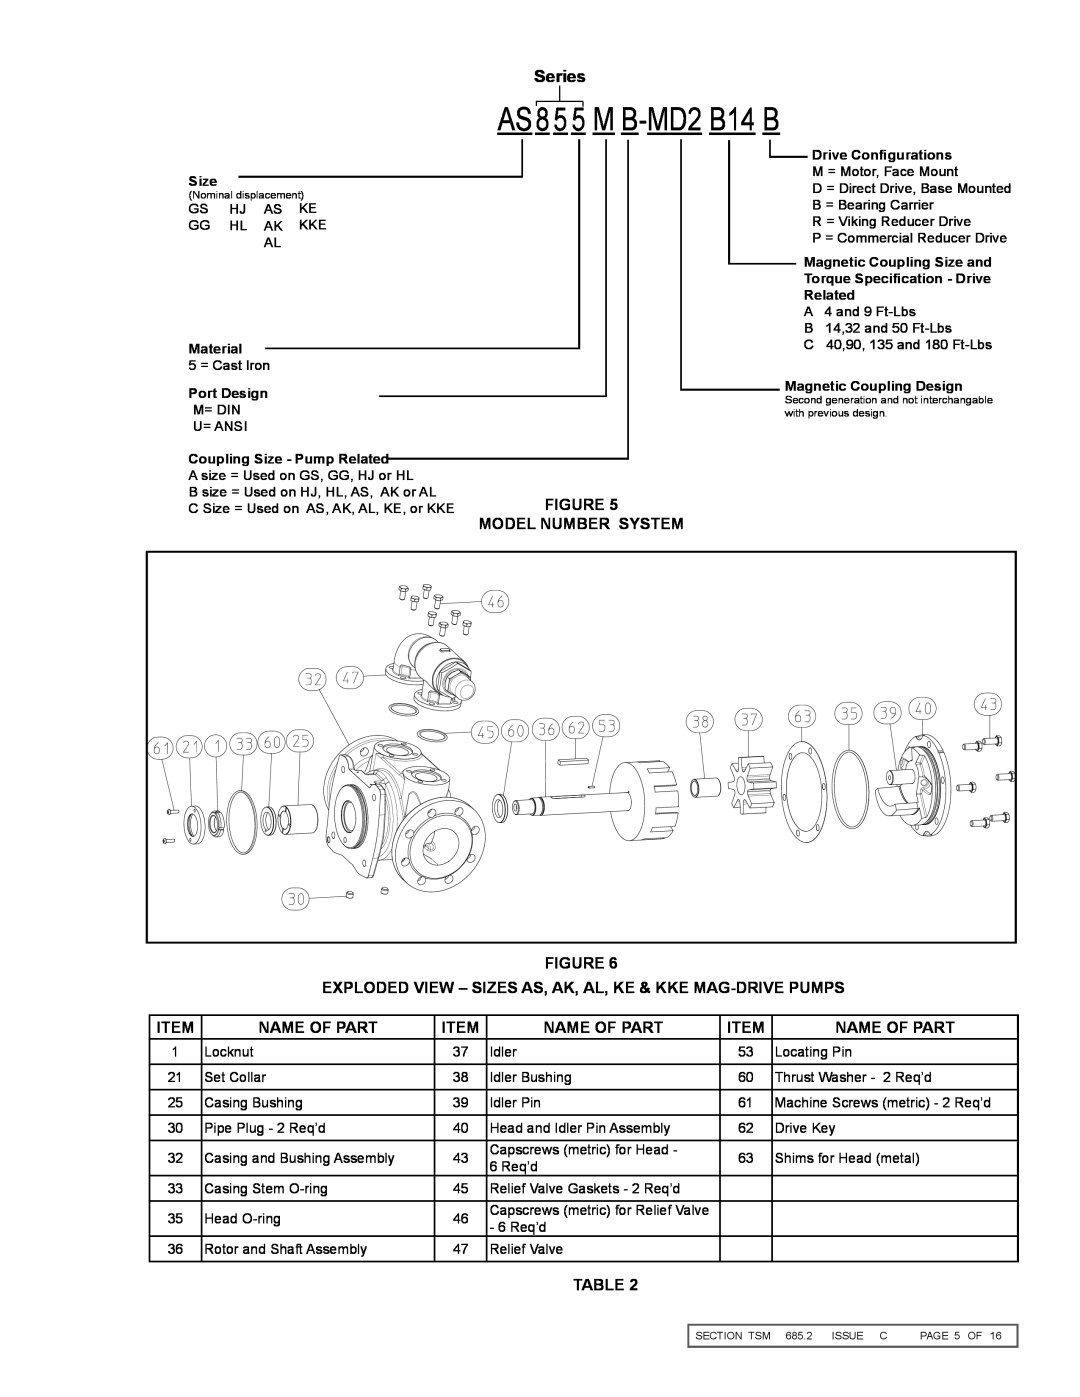 Viking 855 service manual AS8 5 5 M B-MD2B14 B, Model number system, Name Of Part 